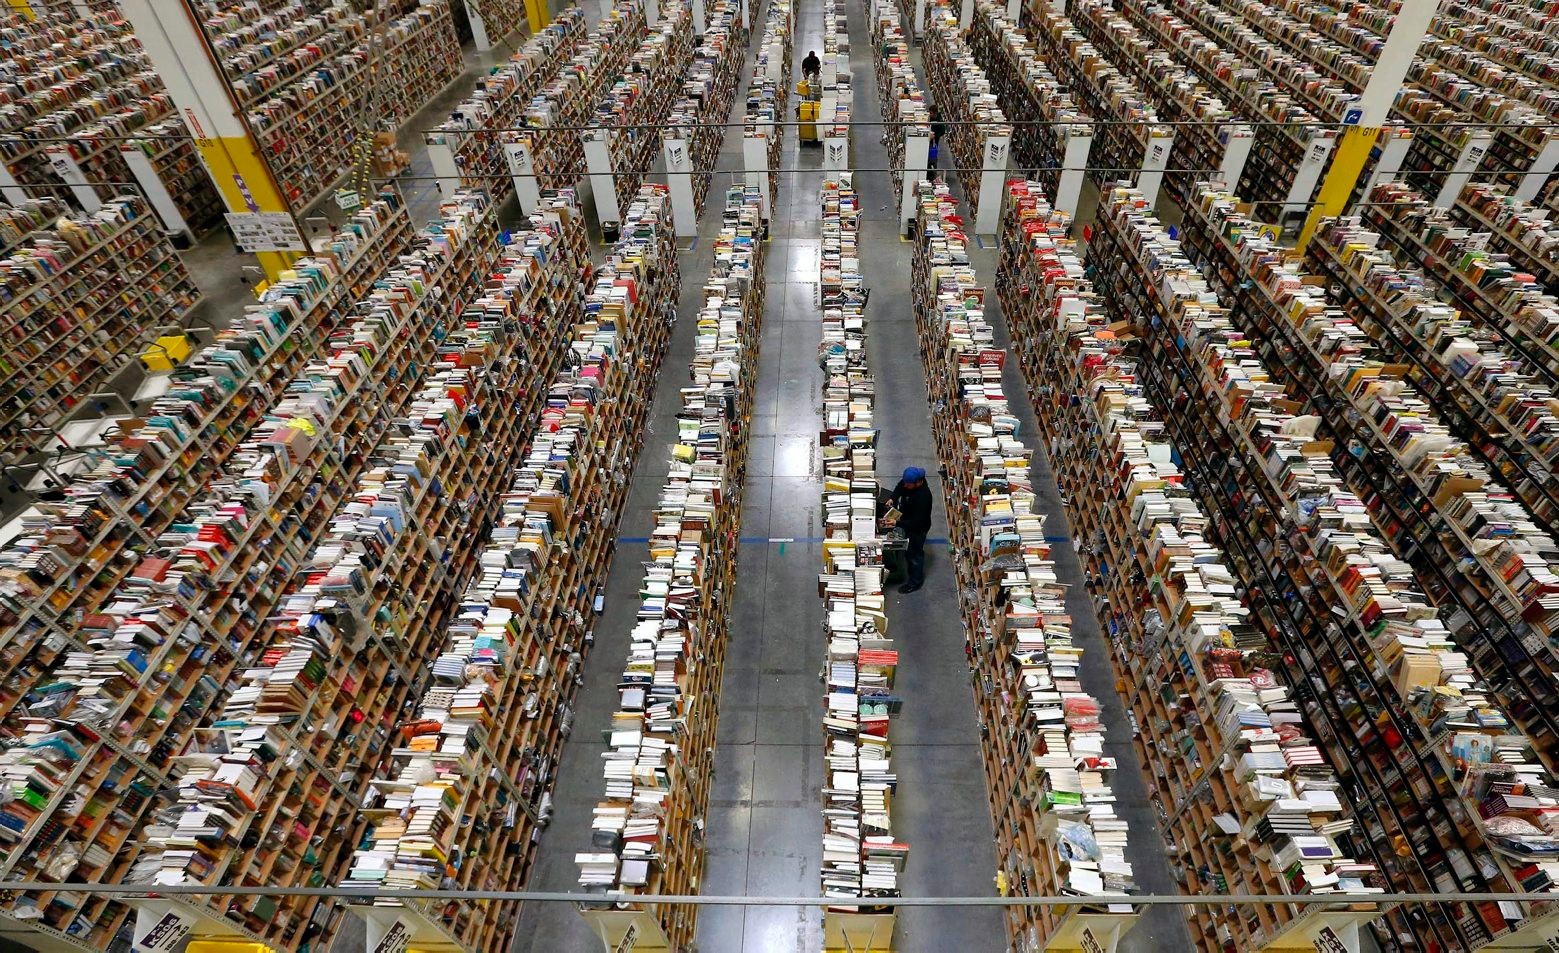 FILE - In this Monday, Dec. 2, 2013, file photo, an Amazon.com employee stocks products along one of the many miles of aisles at an Amazon.com Fulfillment Center in Phoenix. Amazon reports quarterly earnings on Thursday, Jan. 30, 2014. (AP Photo/Ross D. Franklin, File) Earns Amazon